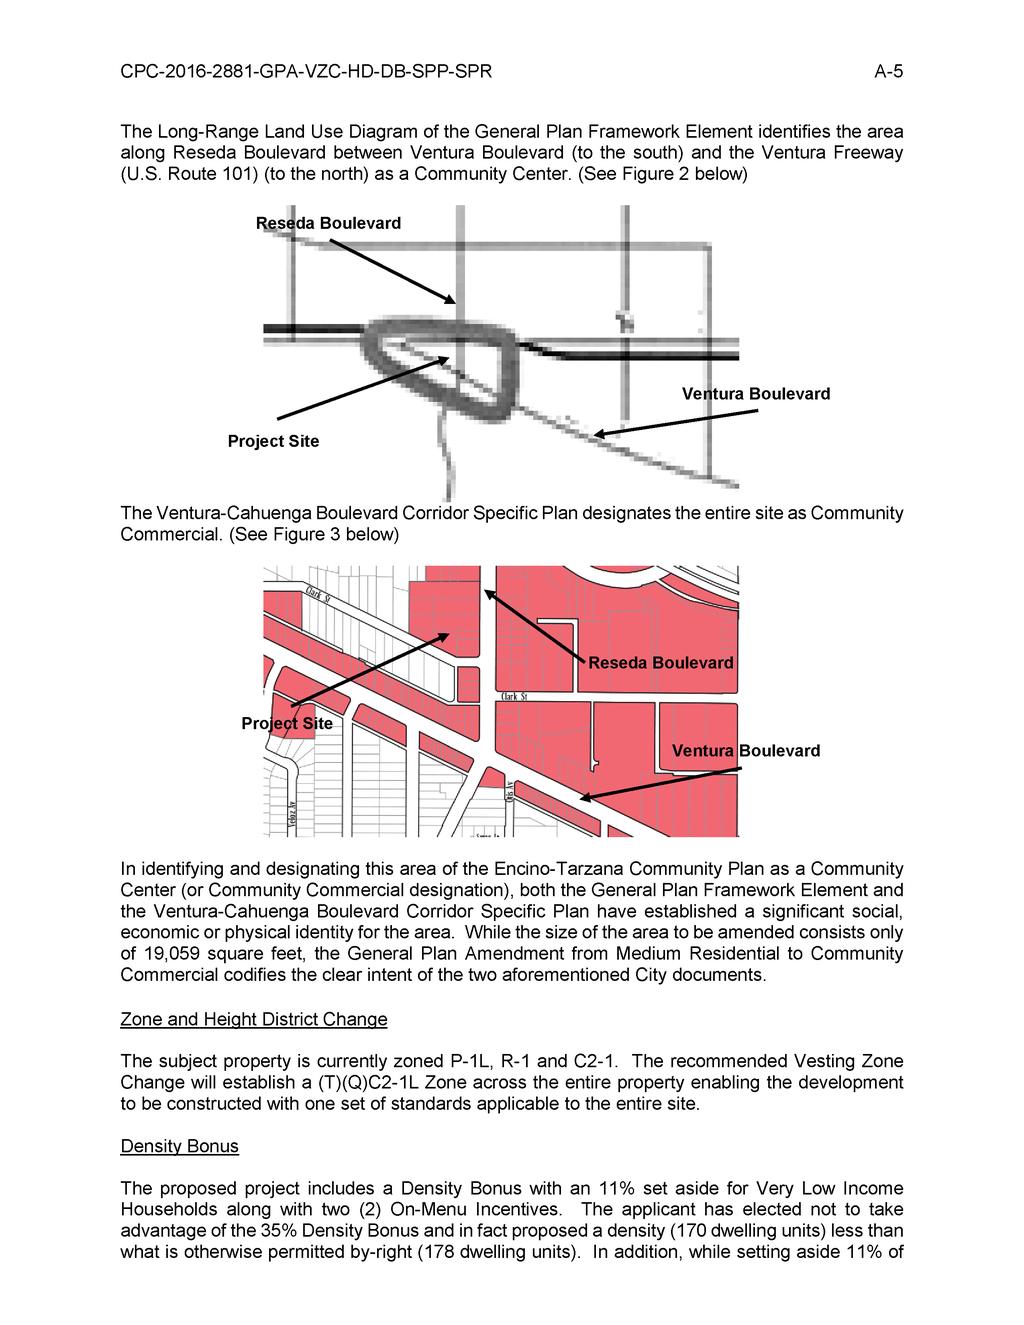 A-5 CPC-2016-2881-GPA-VZC-HD-DB-SPP-SPR The Long-Range Land Use Diagram of the General Plan Framework Element identifies the area along Reseda Boulevard between Ventura Boulevard (to the south) and